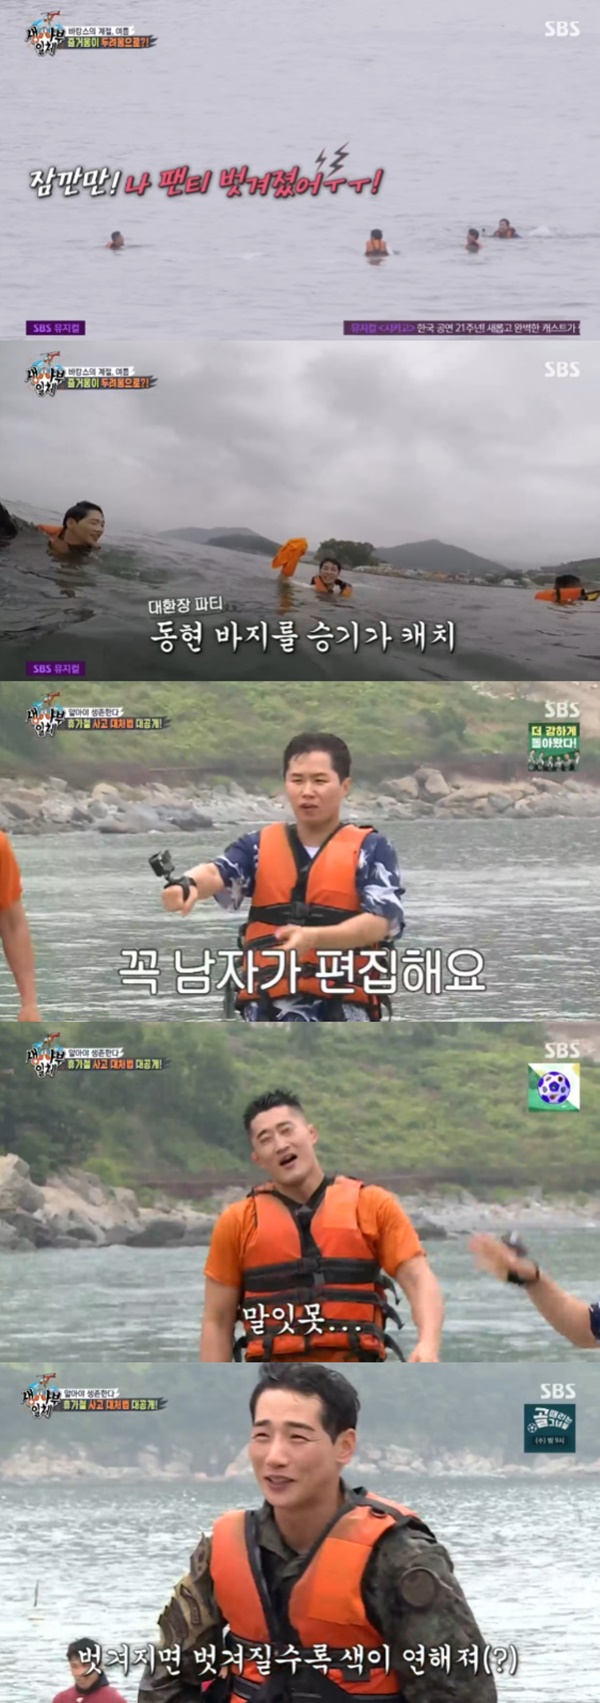 All The Butlers Kim Dong-Hyun rides Banana boat and has a happening where pants and Panti are peeled off.The SBS entertainment program All The Butlers, which was broadcast on the 27th, featured Life and Death to prevent marine accidents in summer.Lee Seung-gi, Kim Dong-Hyun, Yang Se-hyeong and Park fell into the water while riding Banana boat.In this process, Kim Dong-Hyuns pants and Panti were stripped off.Yang Se-hyeong, who was then safely brought ashore by the marine rescue team, said, My camera must be edited by a man.Kim Dong-Hyun fell off the Banana boat and stripped all the pants. Lee Seung-gi also laughed, adding that (the pants) were peeled off like a banana.Park, who witnessed all this, explained, Kim Dong-Hyun pants are orange, yellow inside. The color gets lighter as they peel.